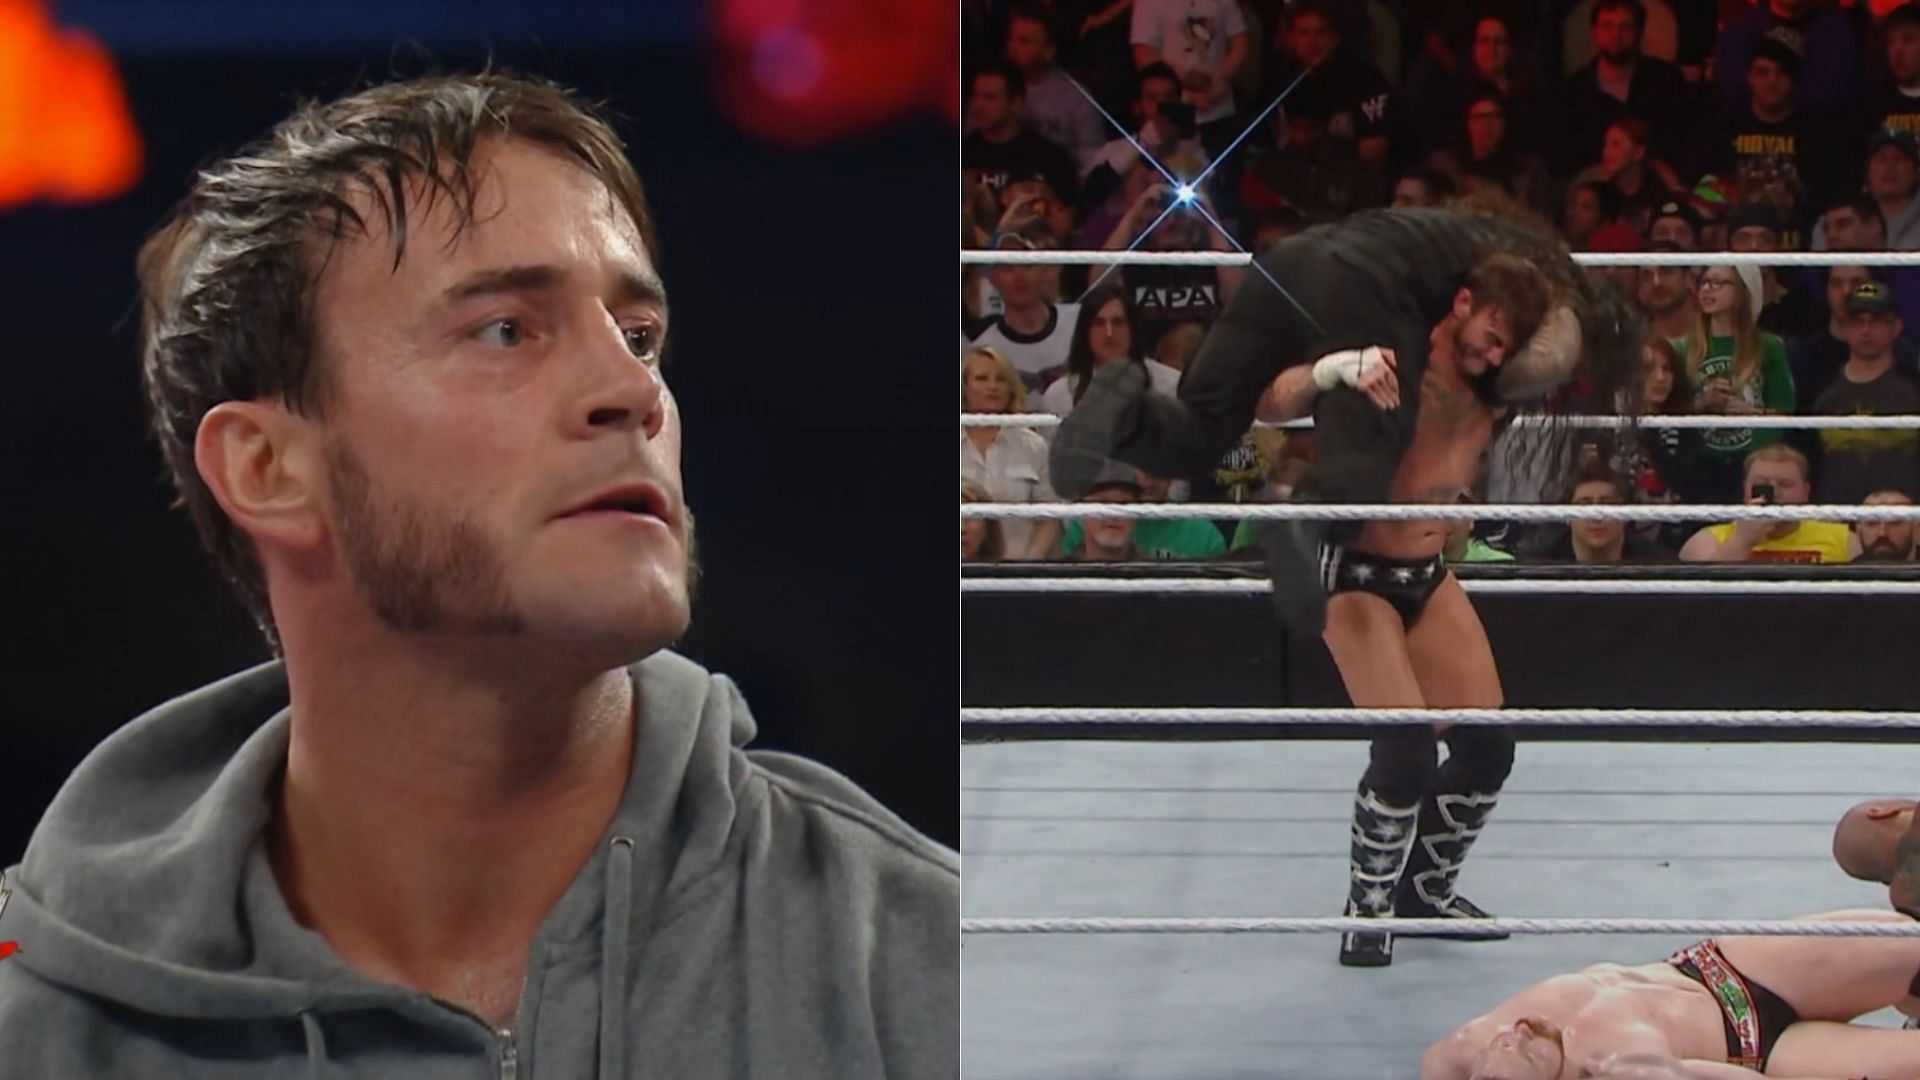 CM Punk hit Roman Reigns with a GTS in the 2014 Royal Rumble match